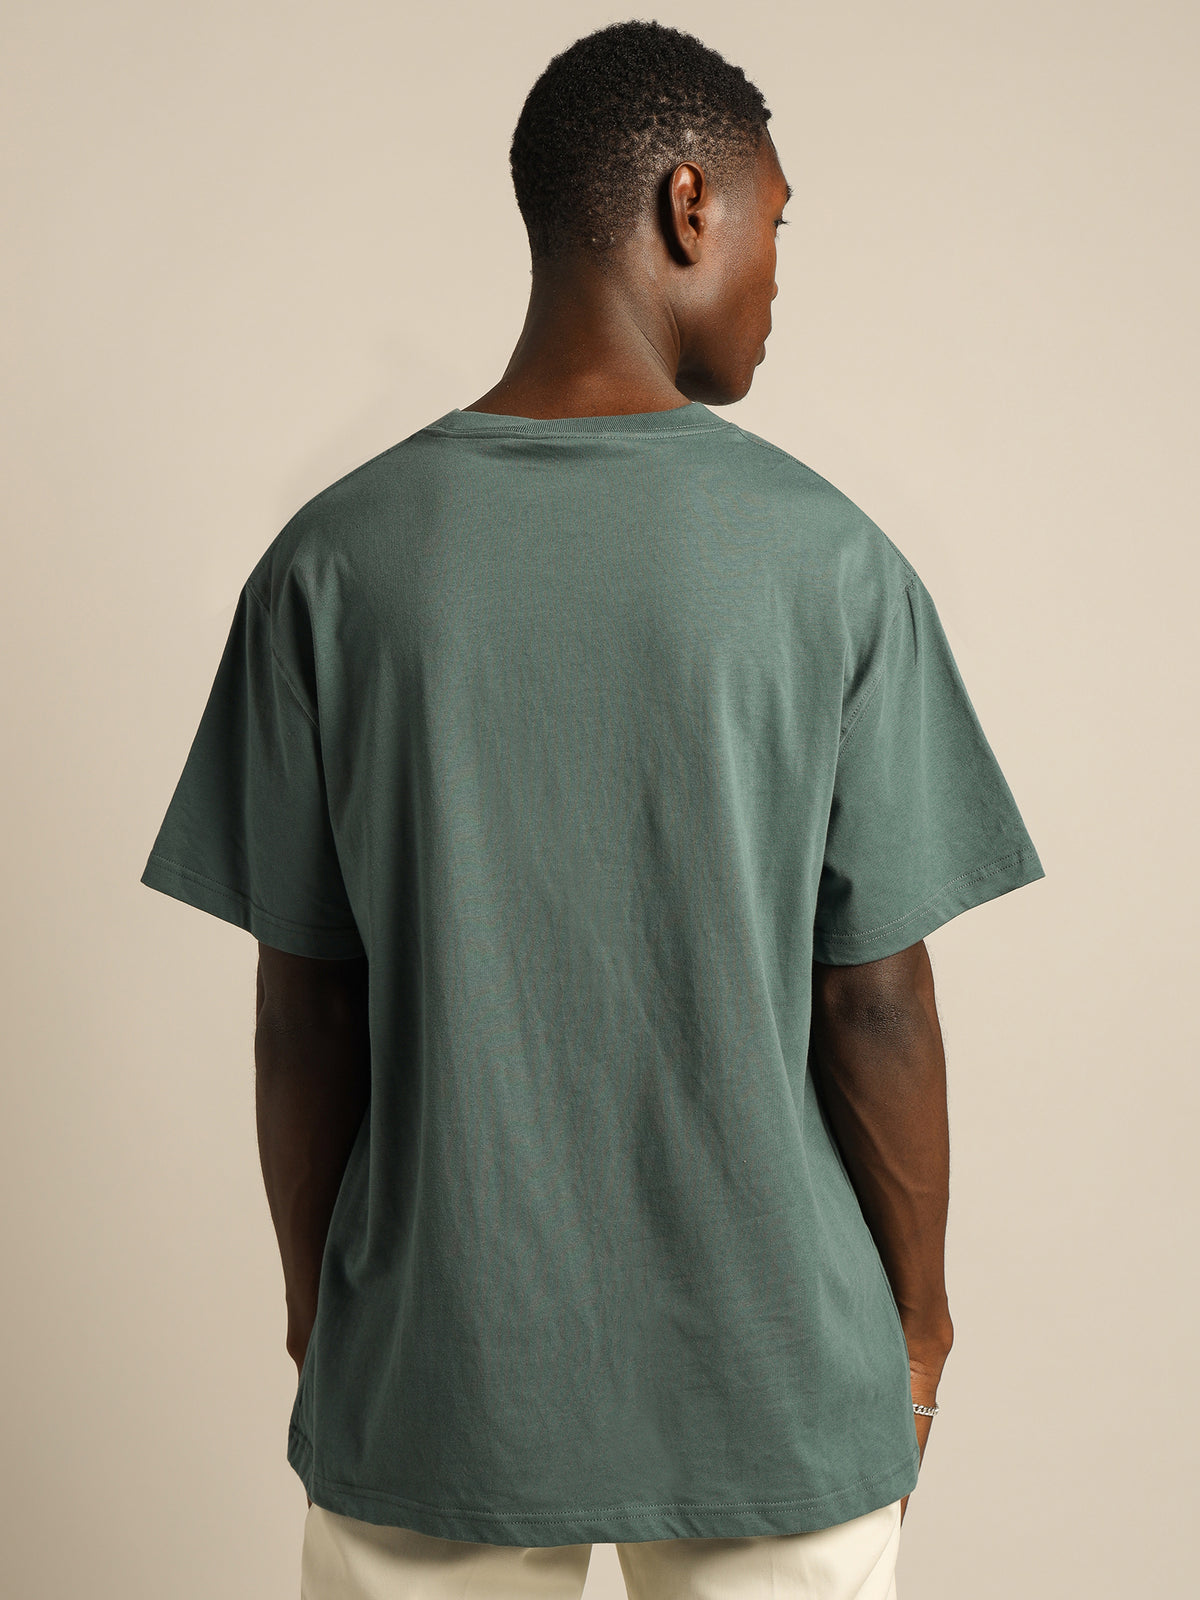 Heavyweight Pocket T-Shirt in Lincoln Green